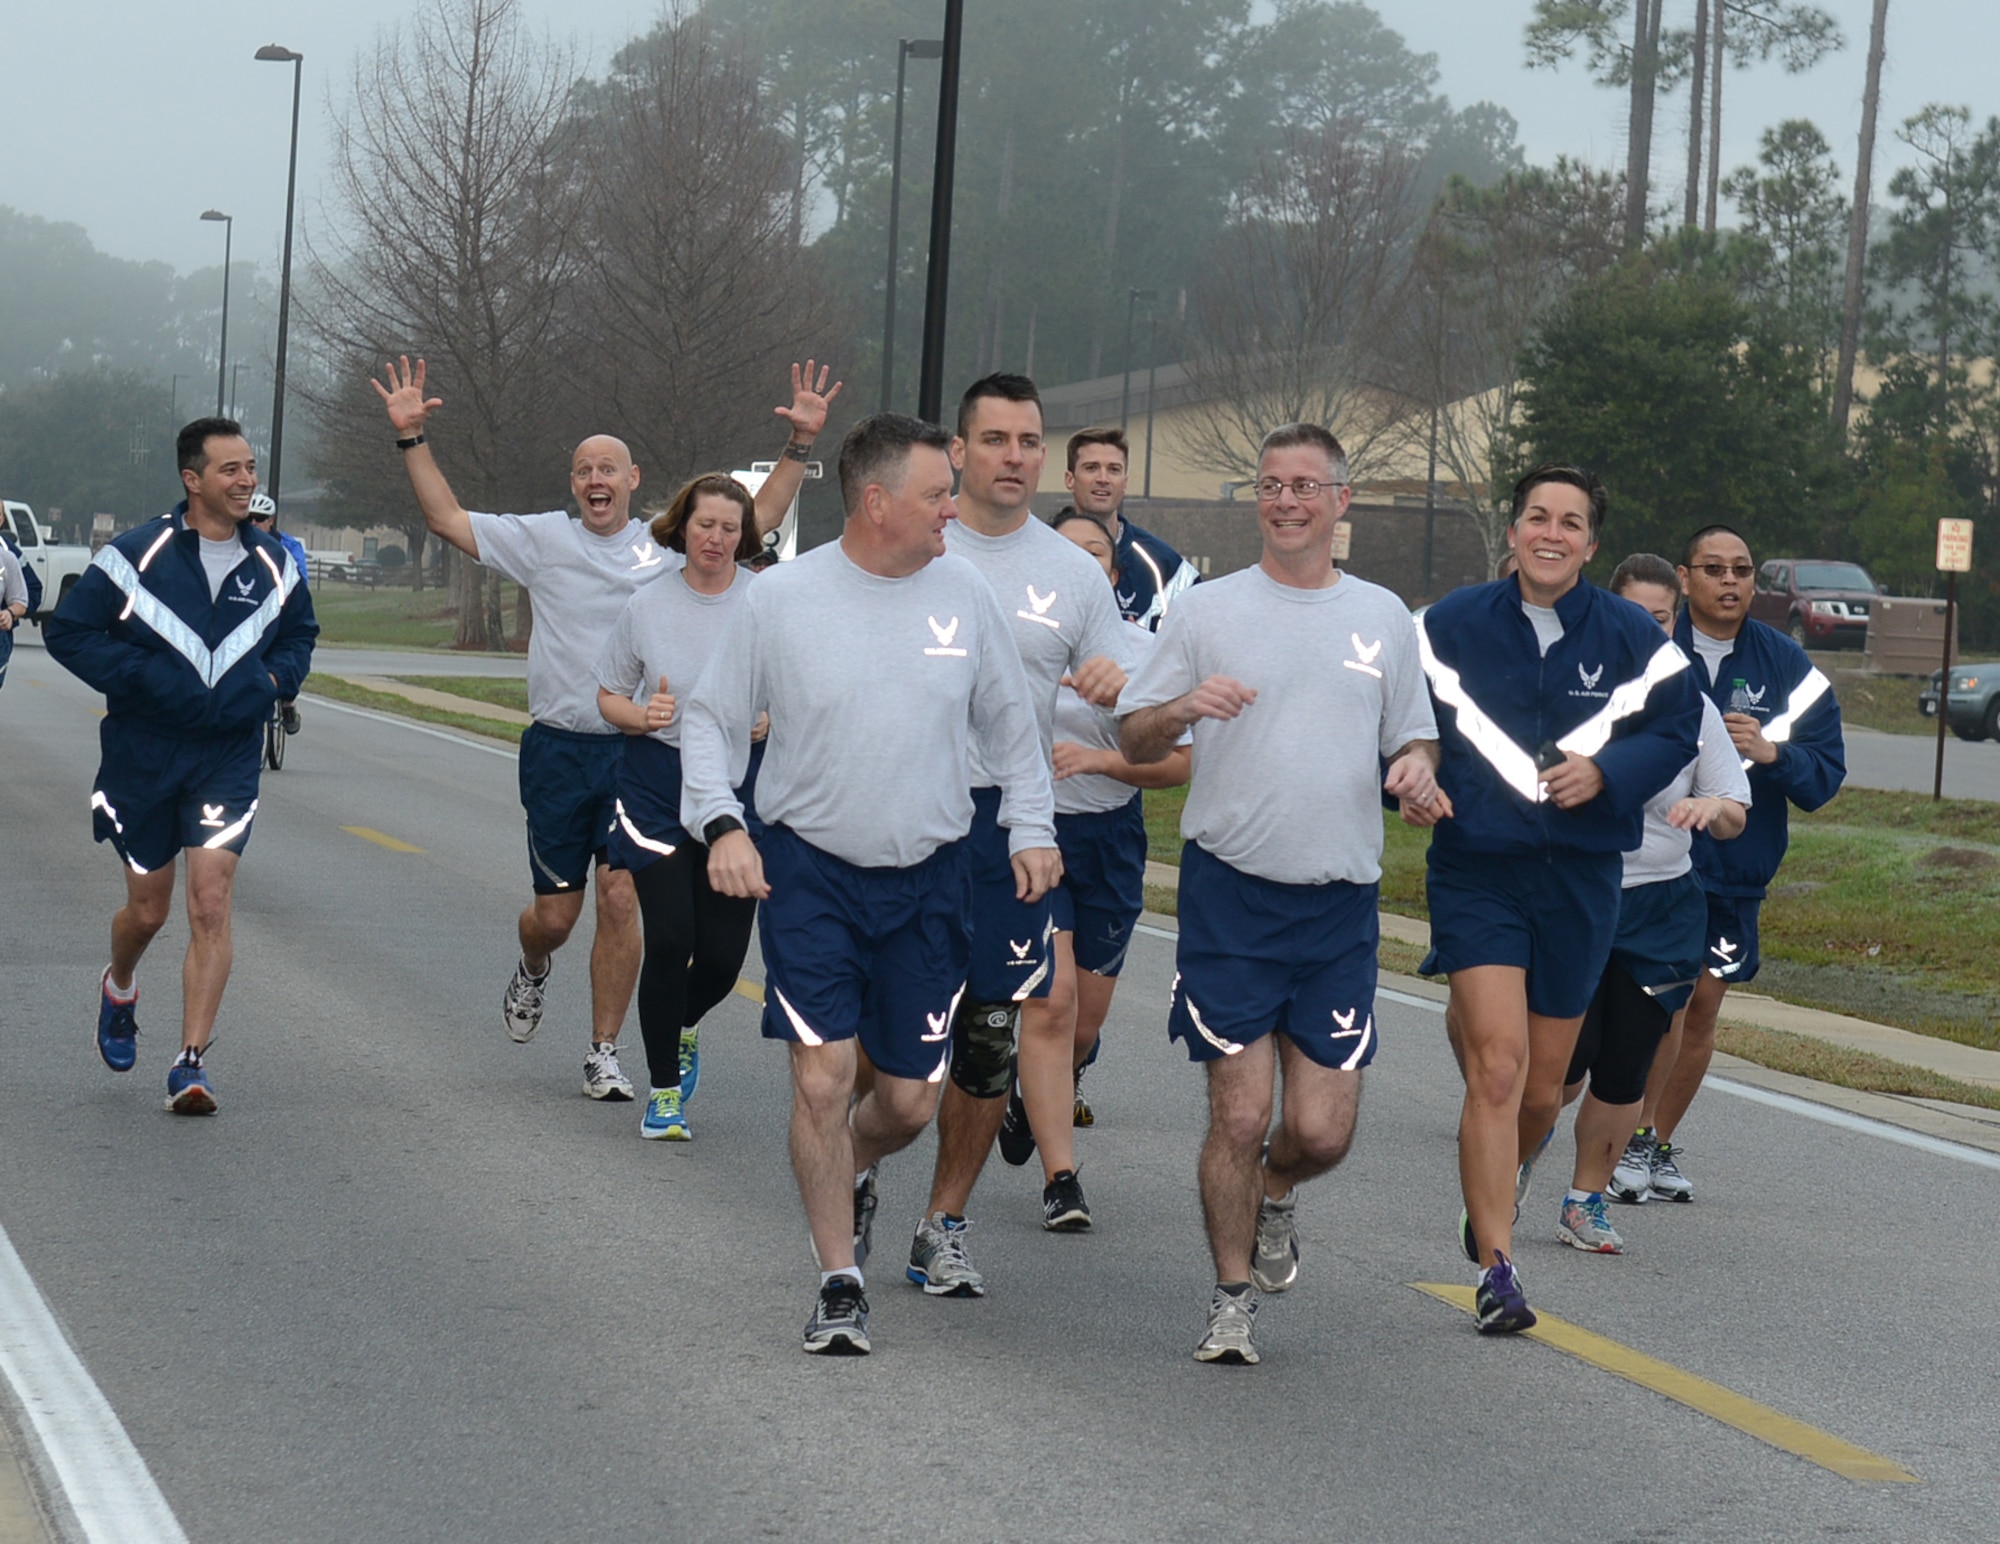 Lt. Gen. Brad Webb, commander of Air Force Special Operations Command, and Chief Master Sgt. Greg Smith, AFSOC command chief, run together during a 5K run at Hurlburt Field, Fla., Feb. 3, 2017. The AFSOC headquarters staff runs together once a month. (U.S. Air Force photo/Staff Sgt. Melanie Holochwost)